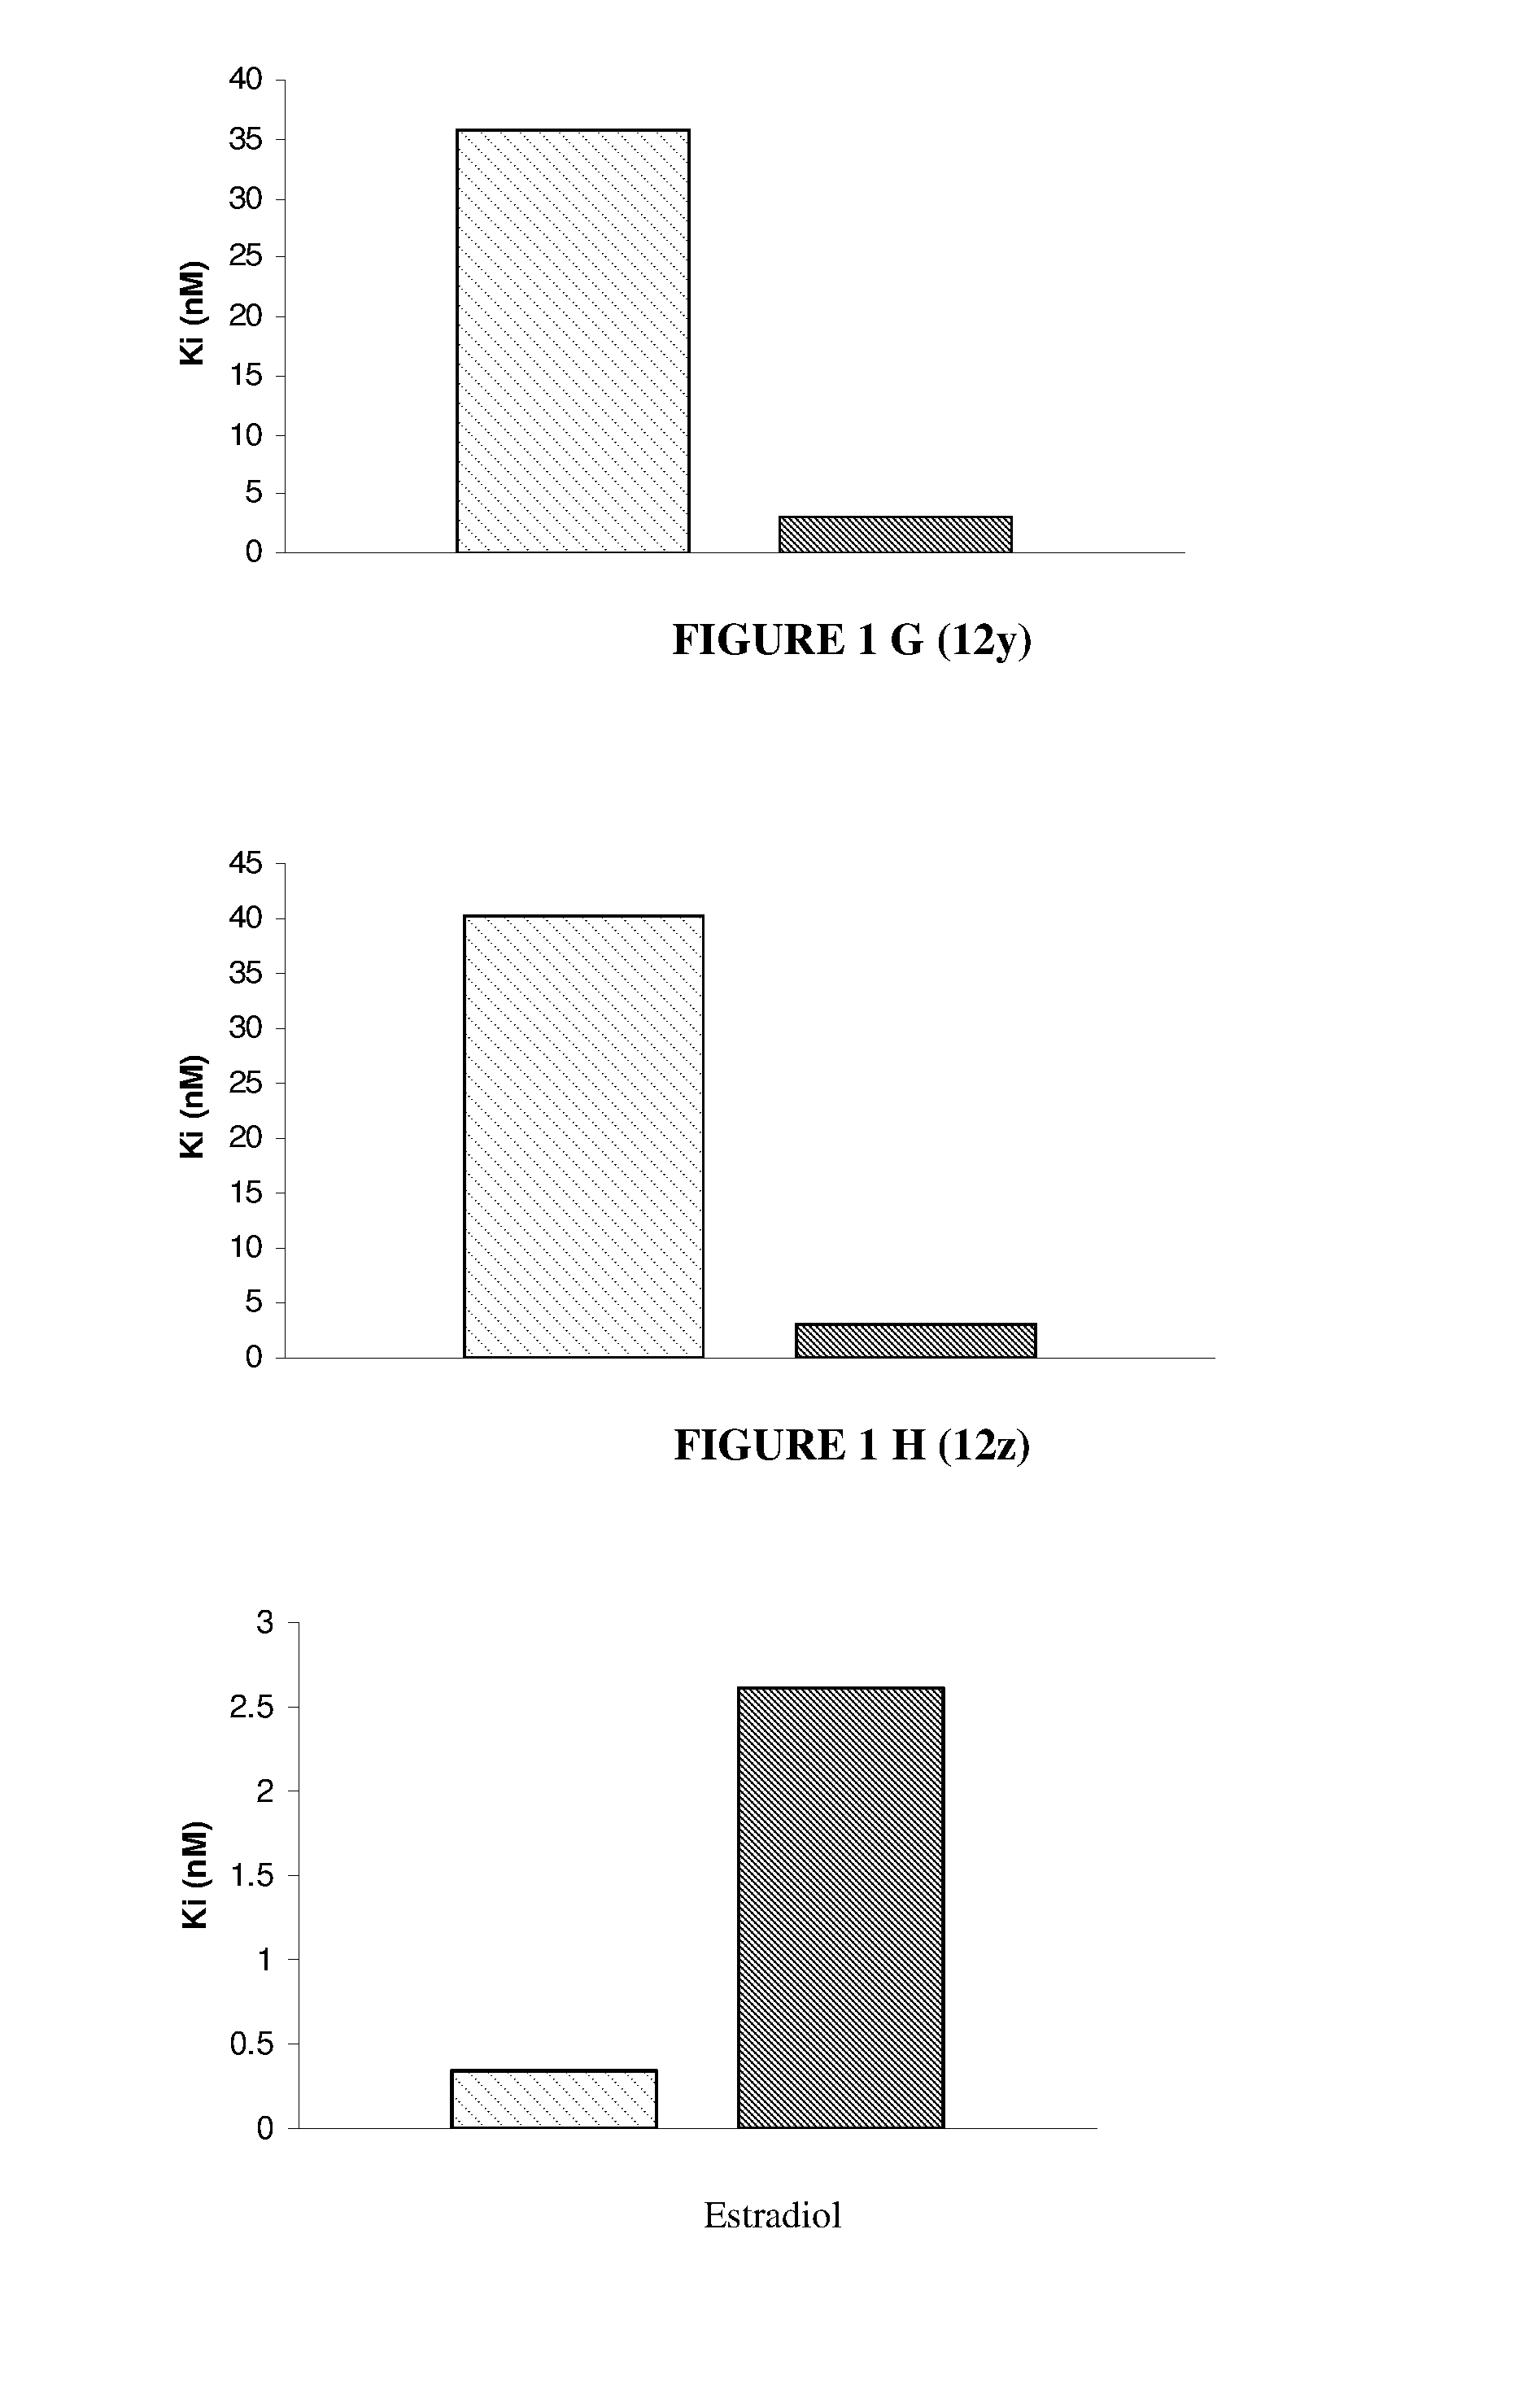 Nuclear receptor binding agents